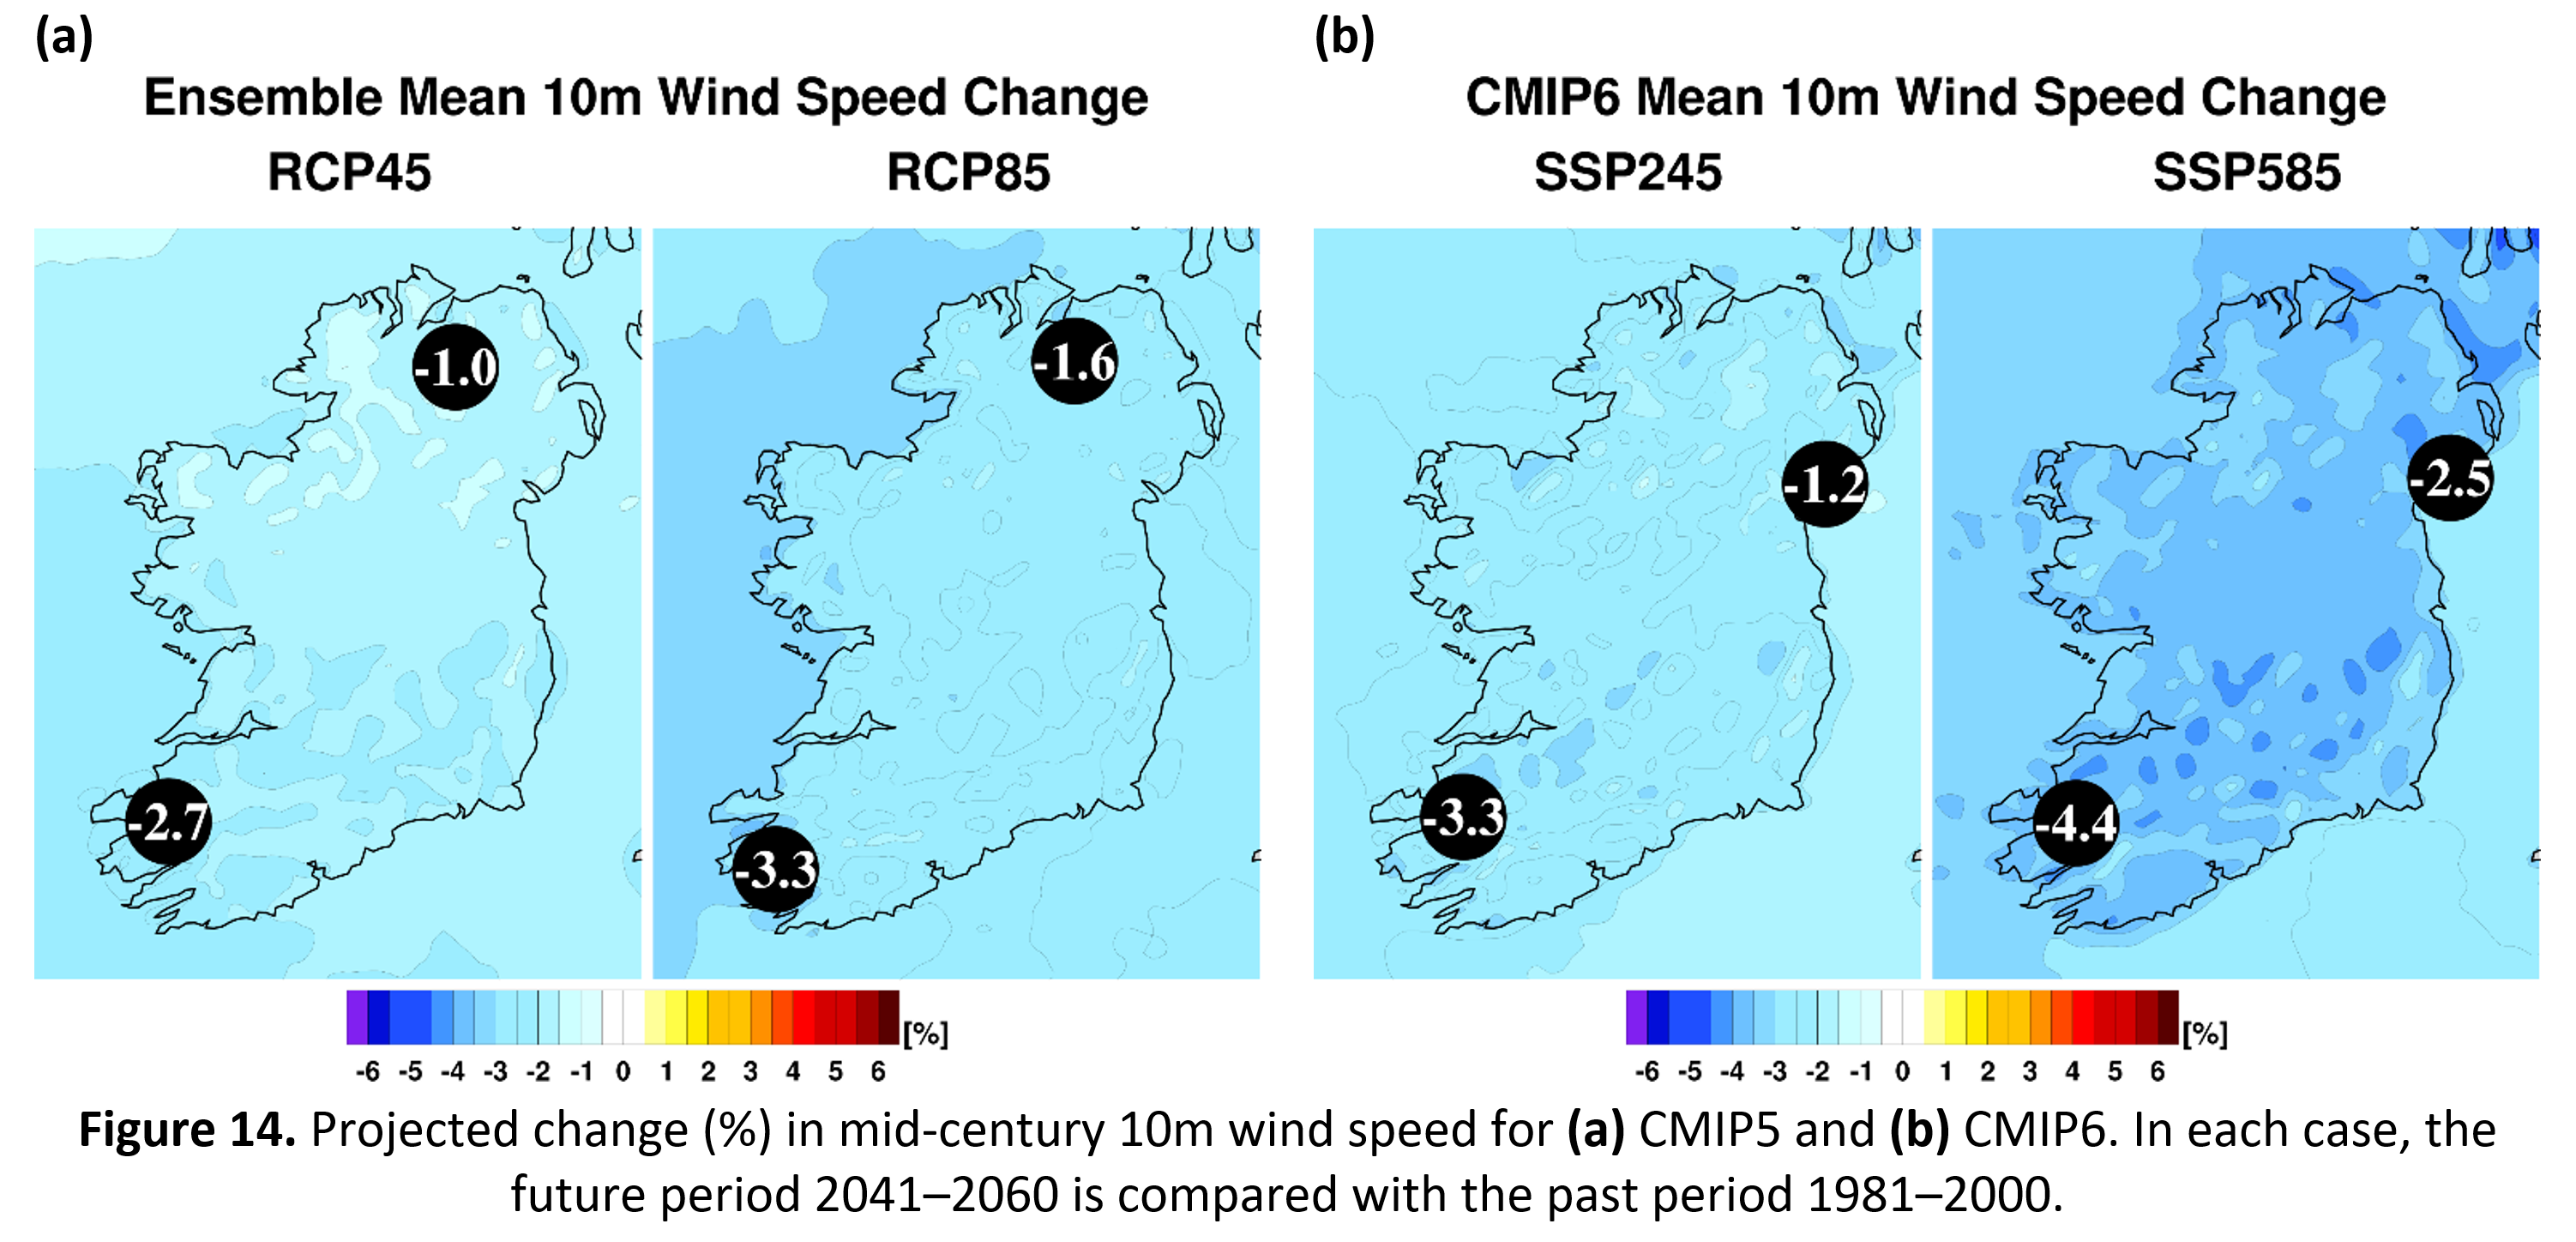 Figure 14. Projected change (%) in mid-century 10m wind speed for (a) CMIP5 and (b) CMIP6. In each case, the future period 2041–2060 is compared with the past period 1981–2000.